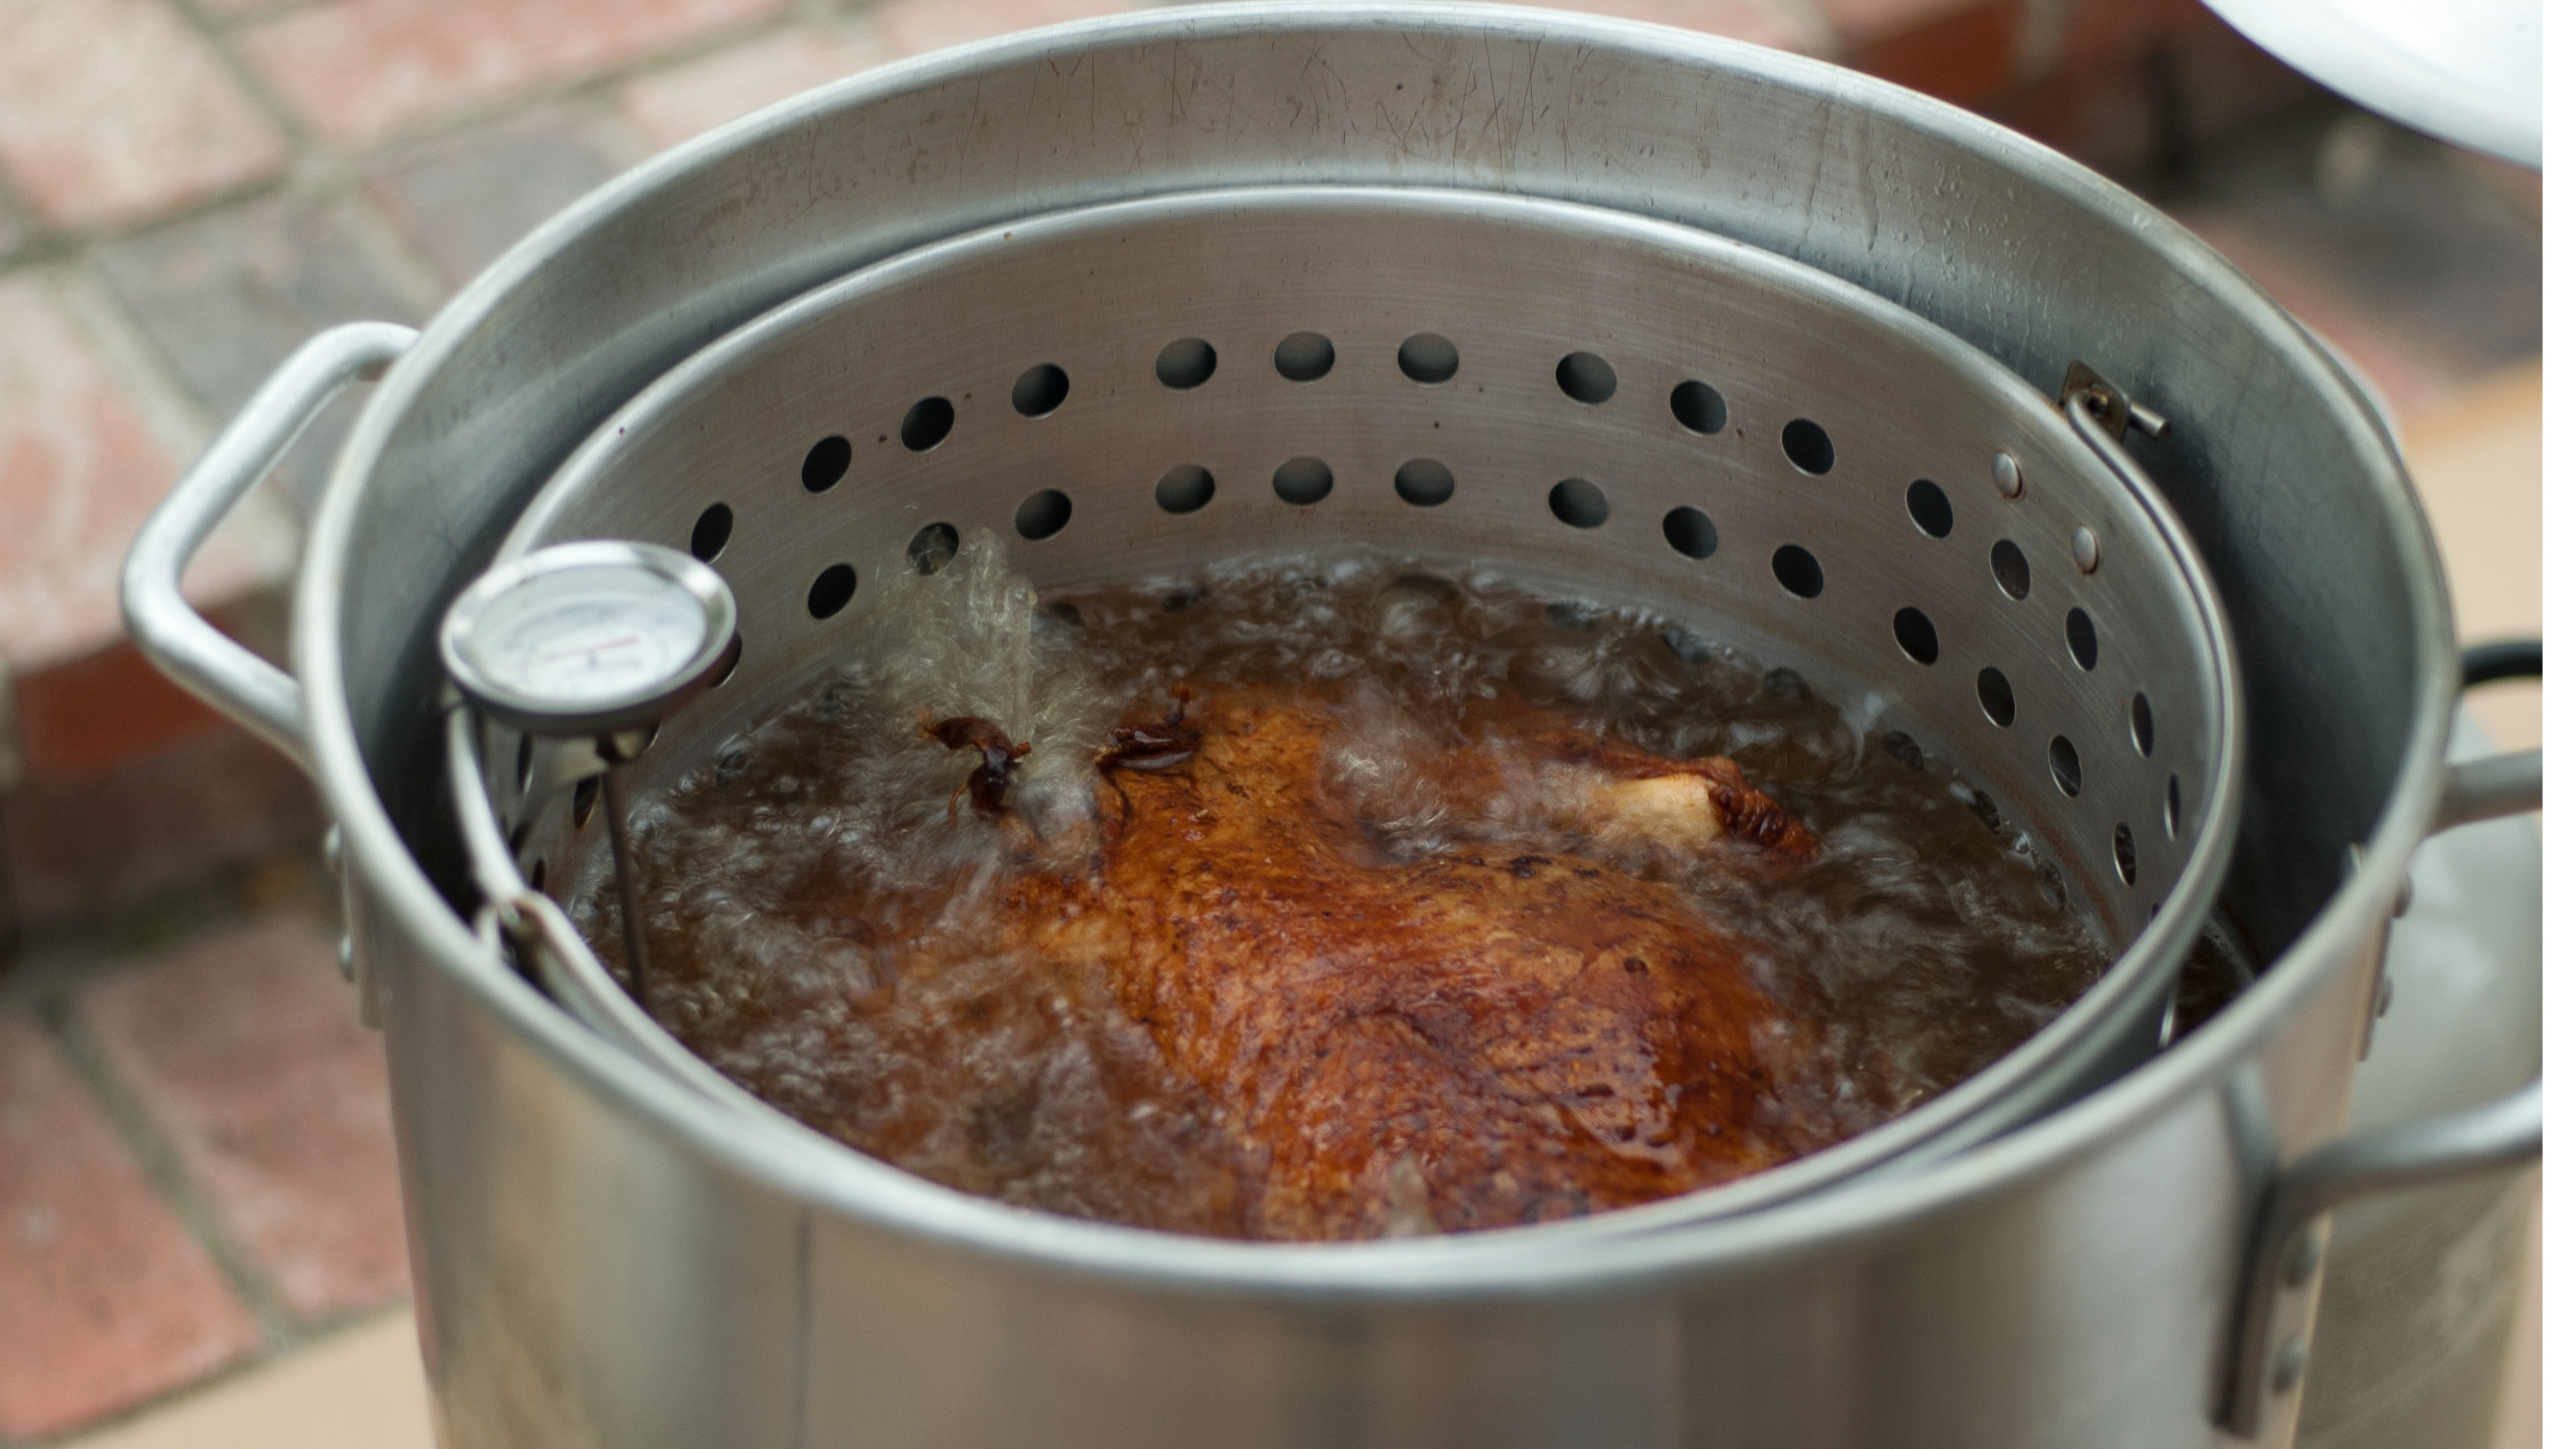 Tips on How to Safely Deep Fry a Turkey - State Farm®